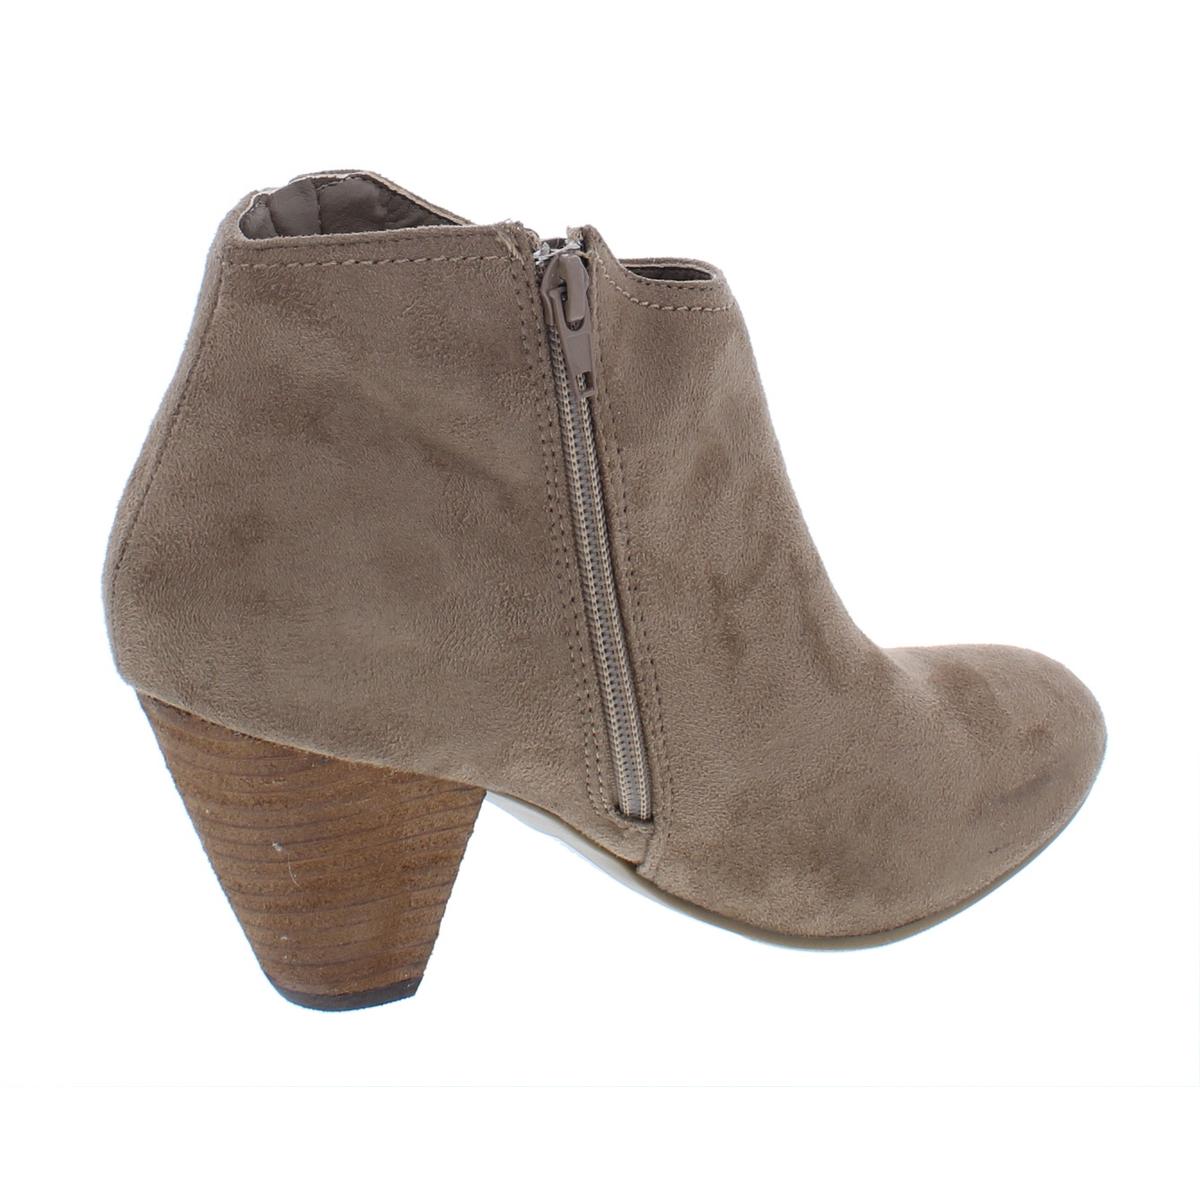 XOXO Womens Amberly Taupe Faux Suede Booties Shoes 8.5 Medium (B,M ...